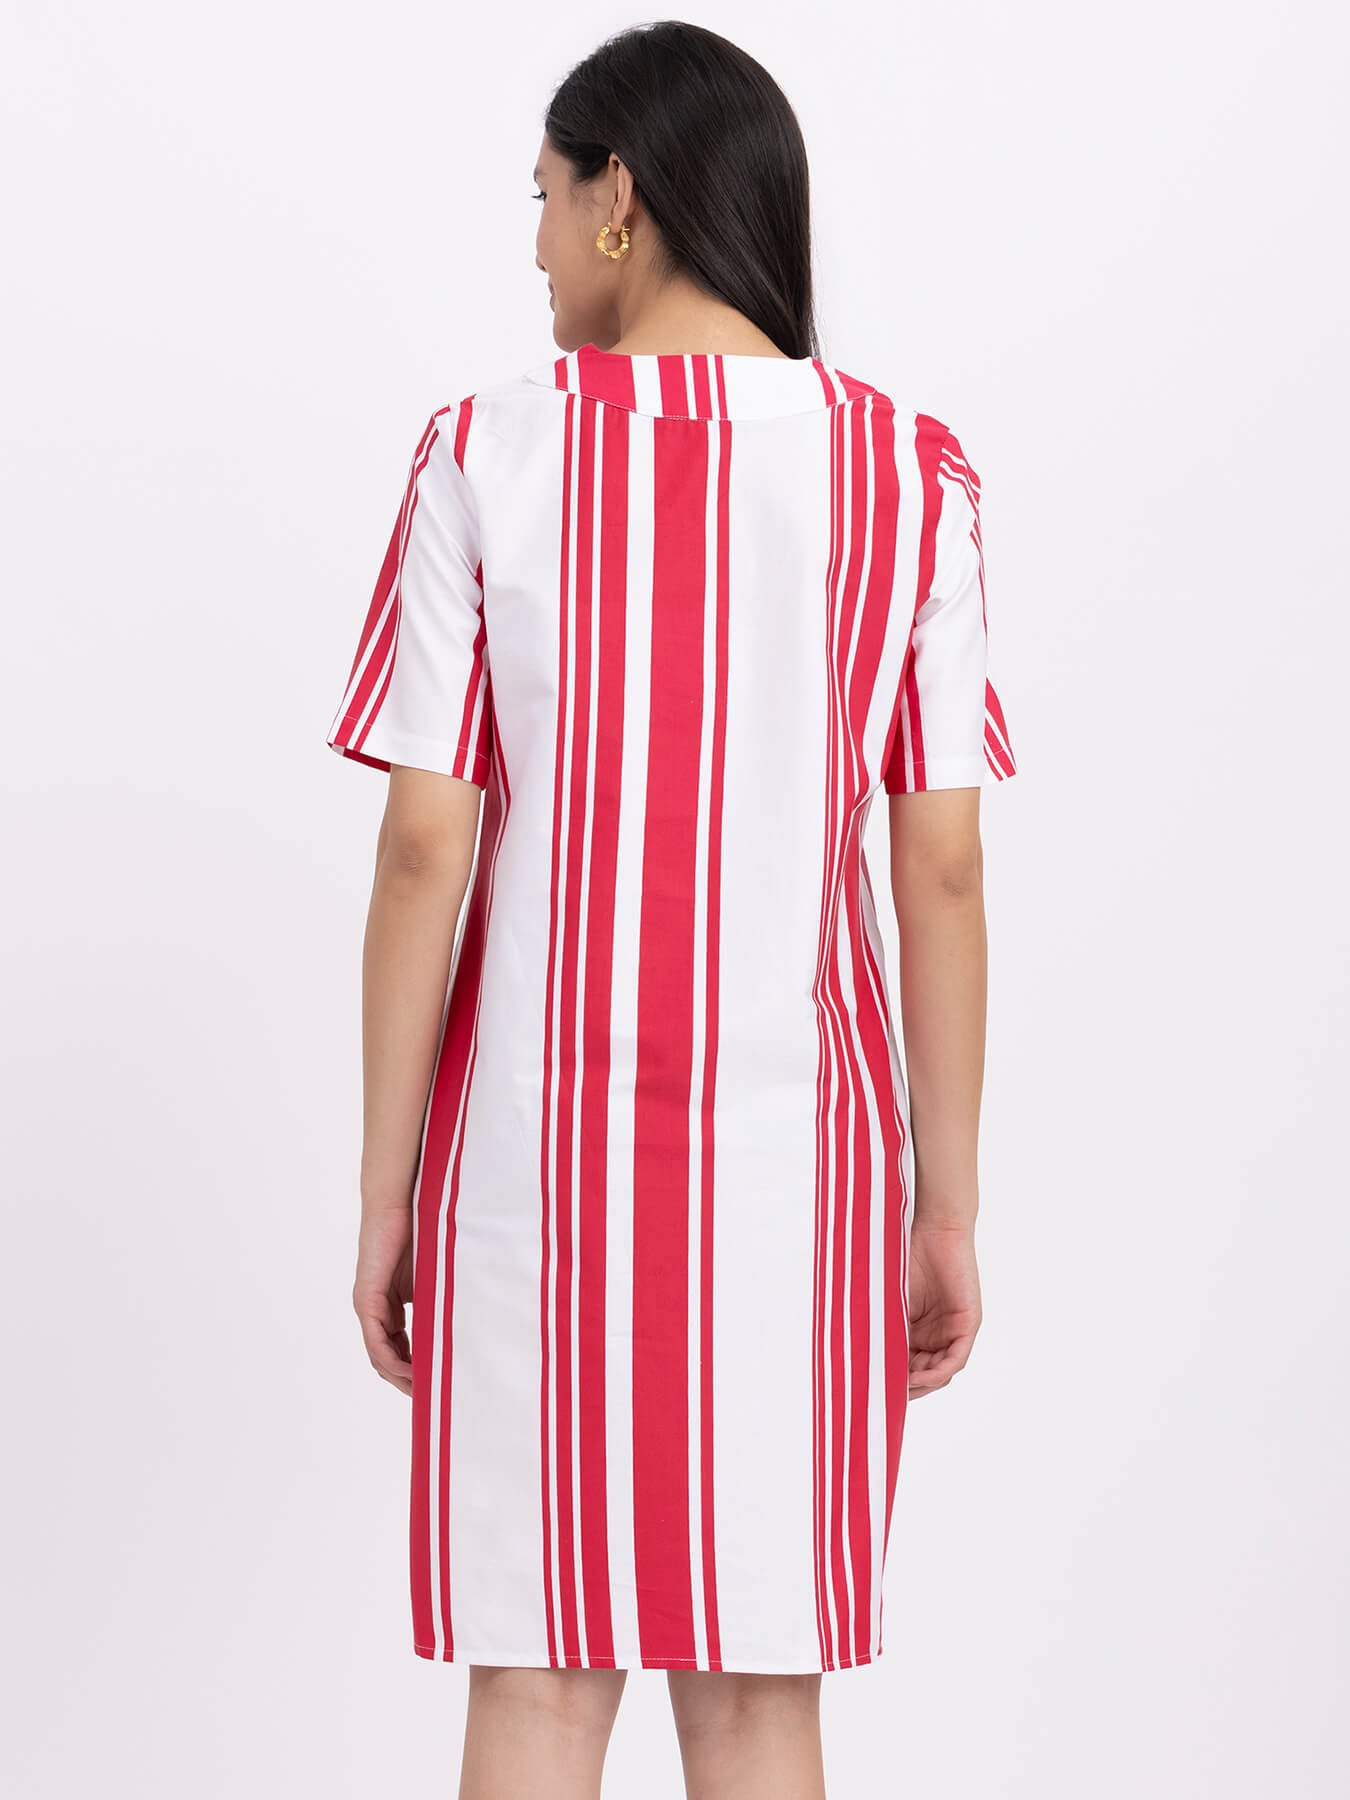 Cotton Striped Dress - Red And White